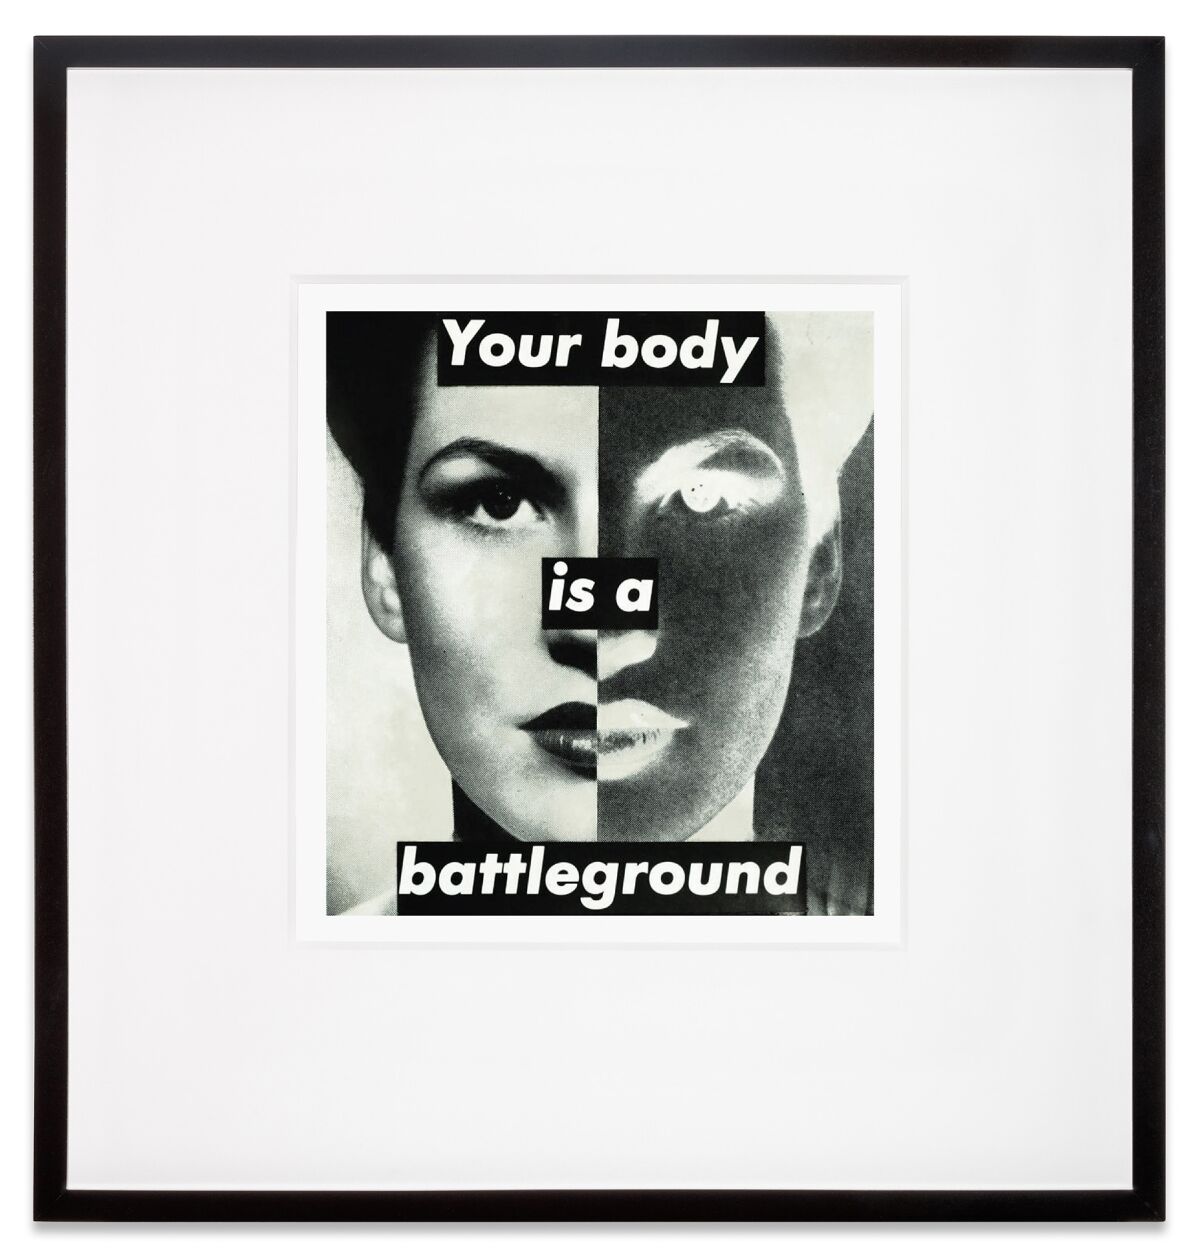 A black and white photo collage shows a woman's face split in two with "Your body is a battleground" in bold type.